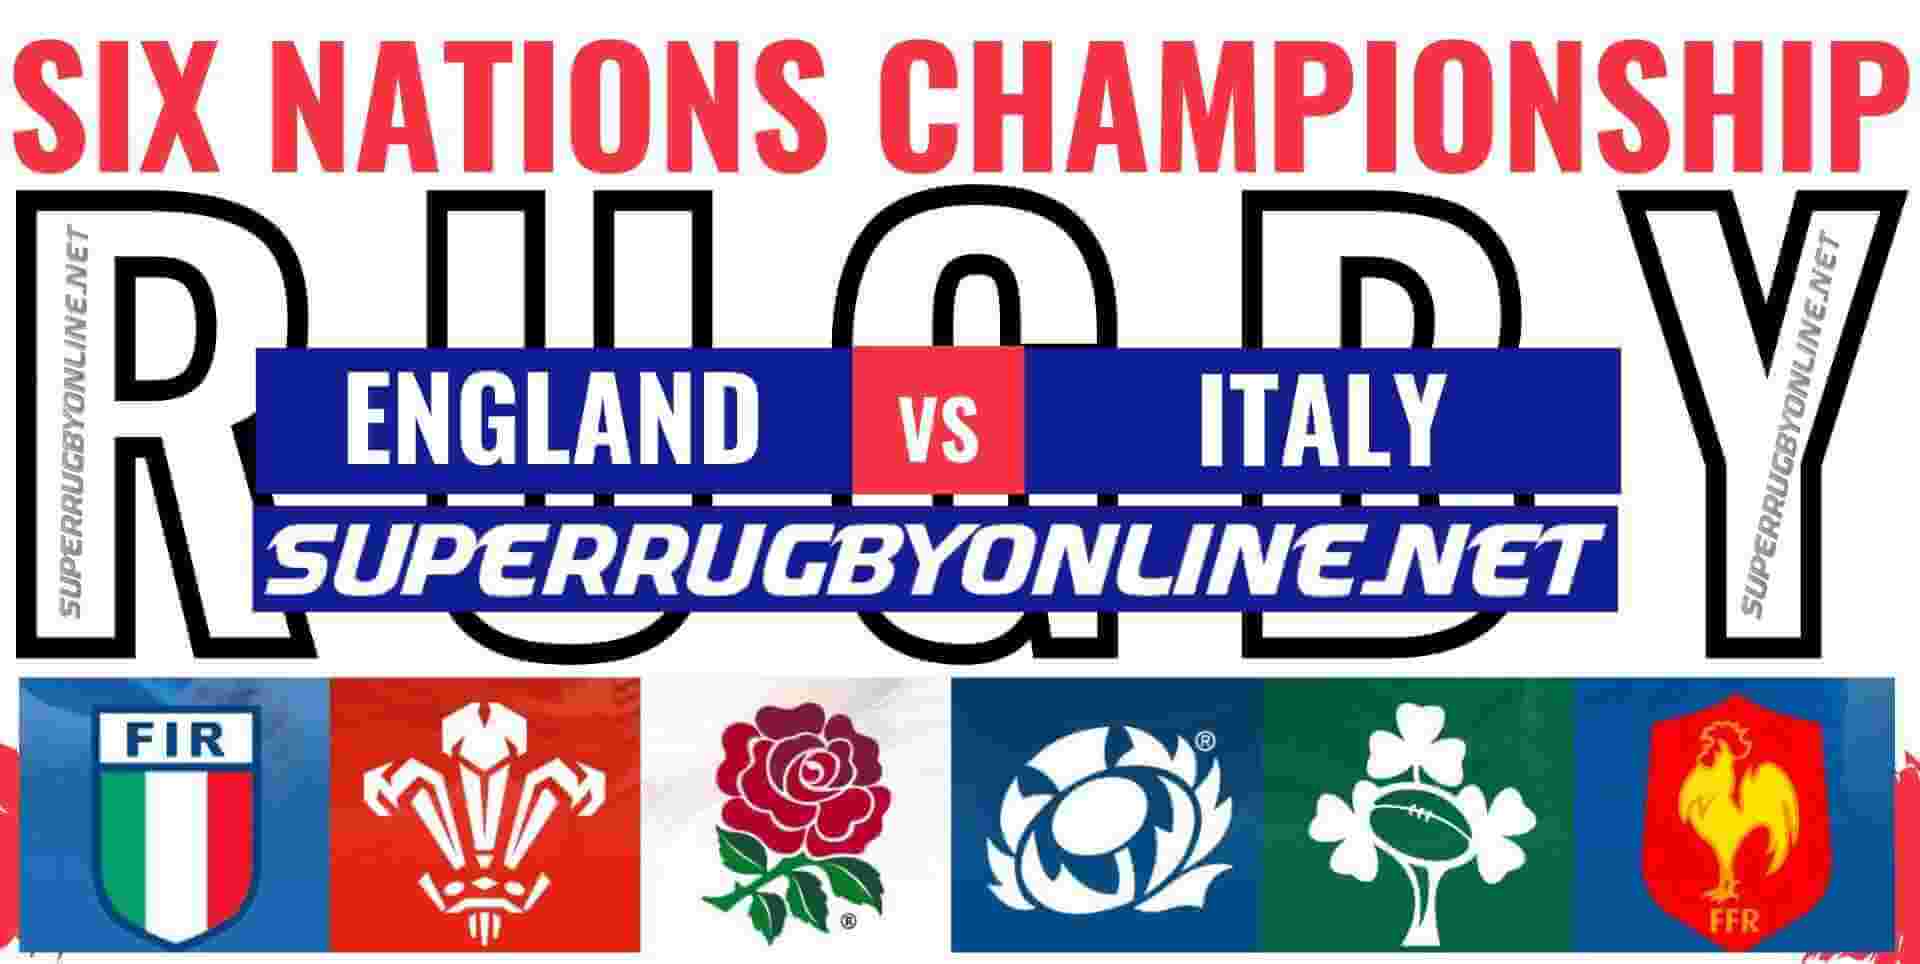 Italy vs England Six Nations Rugby live